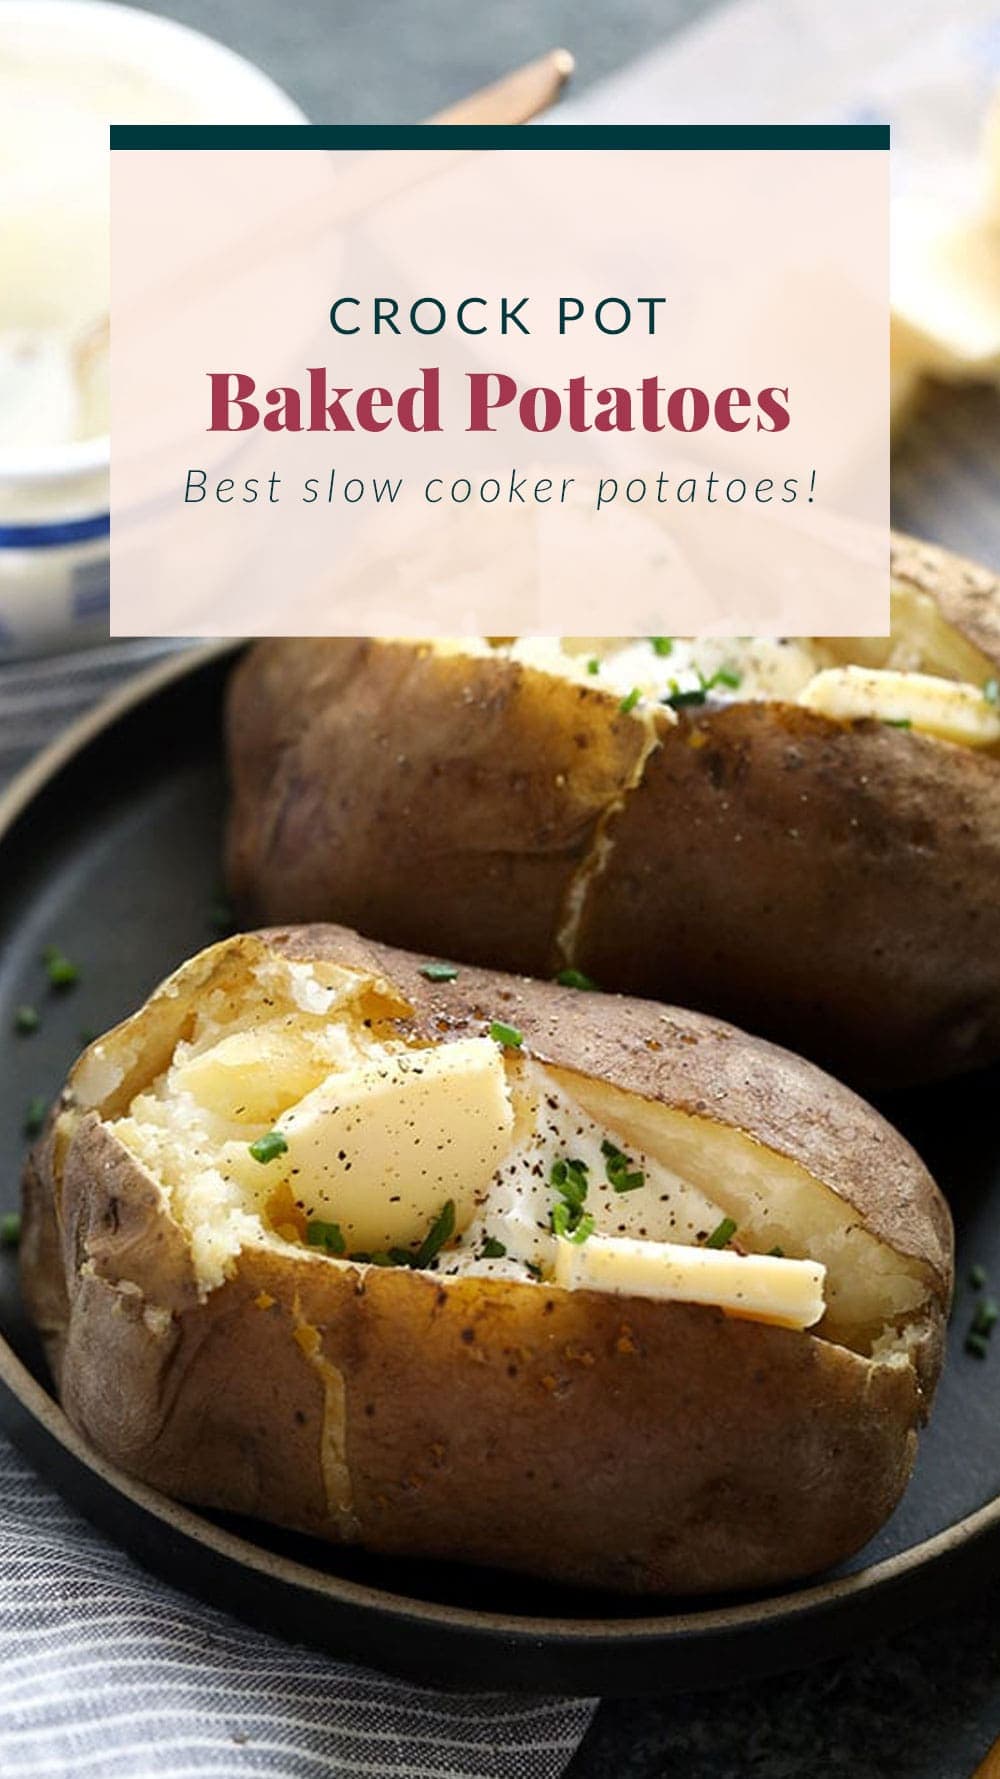 Easy Crock Pot Baked Potatoes - Fit Foodie Finds